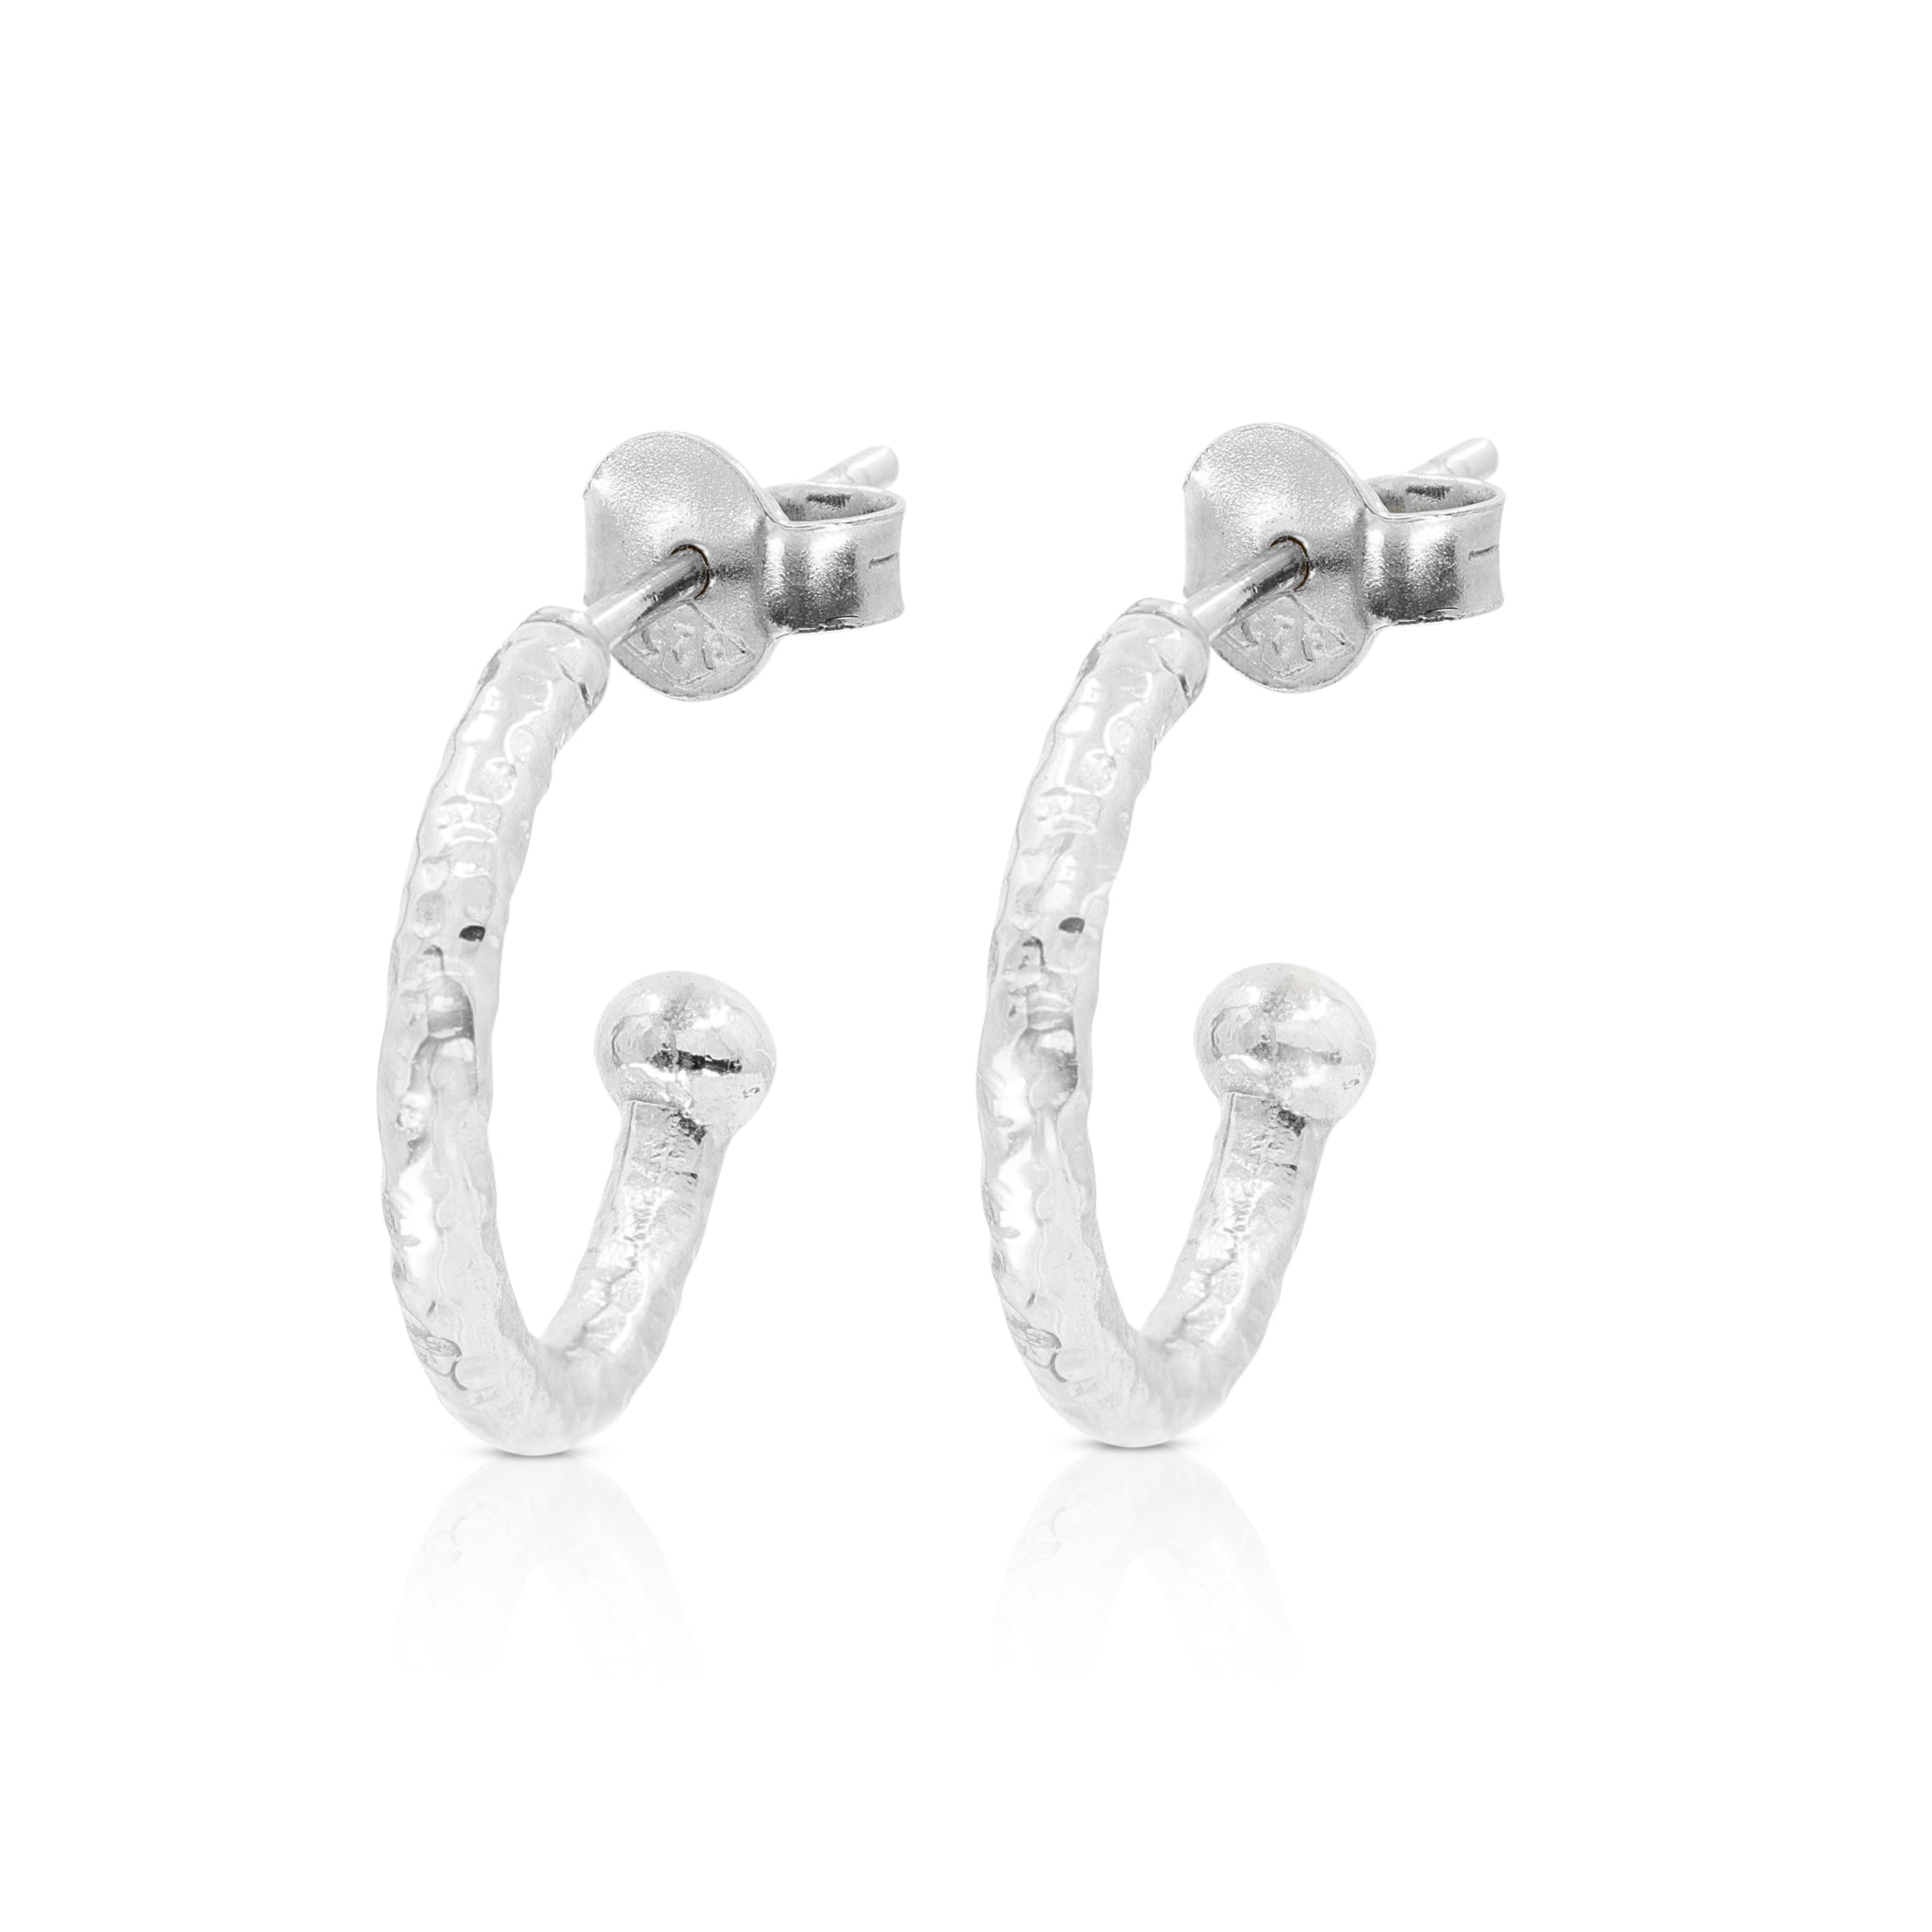 Textured Silver Hoops - Small